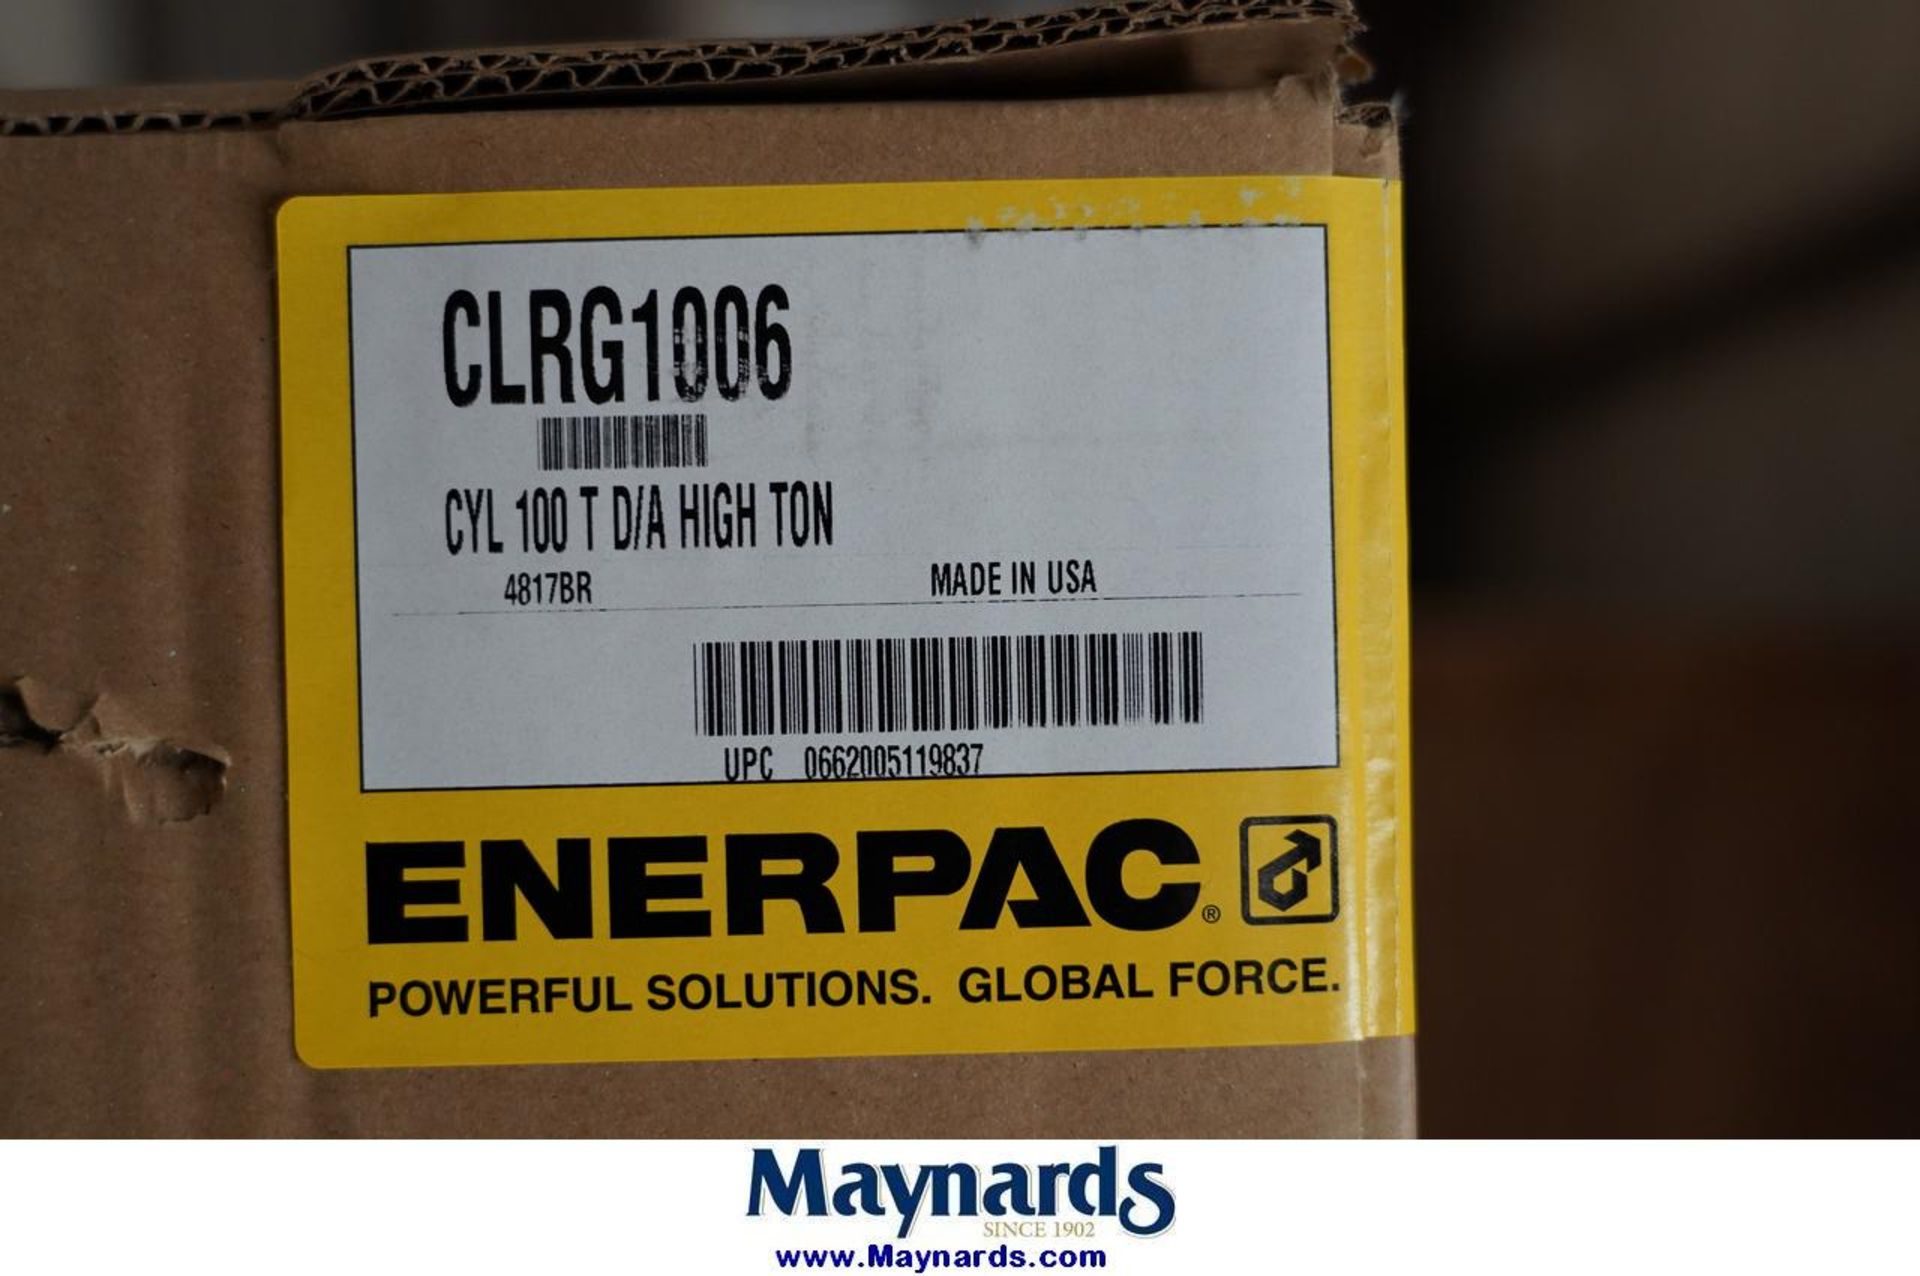 Enerpac CLRG1006 100 Ton Hydraulic Cylinder - Double Acting - High Tonnage - Image 4 of 4